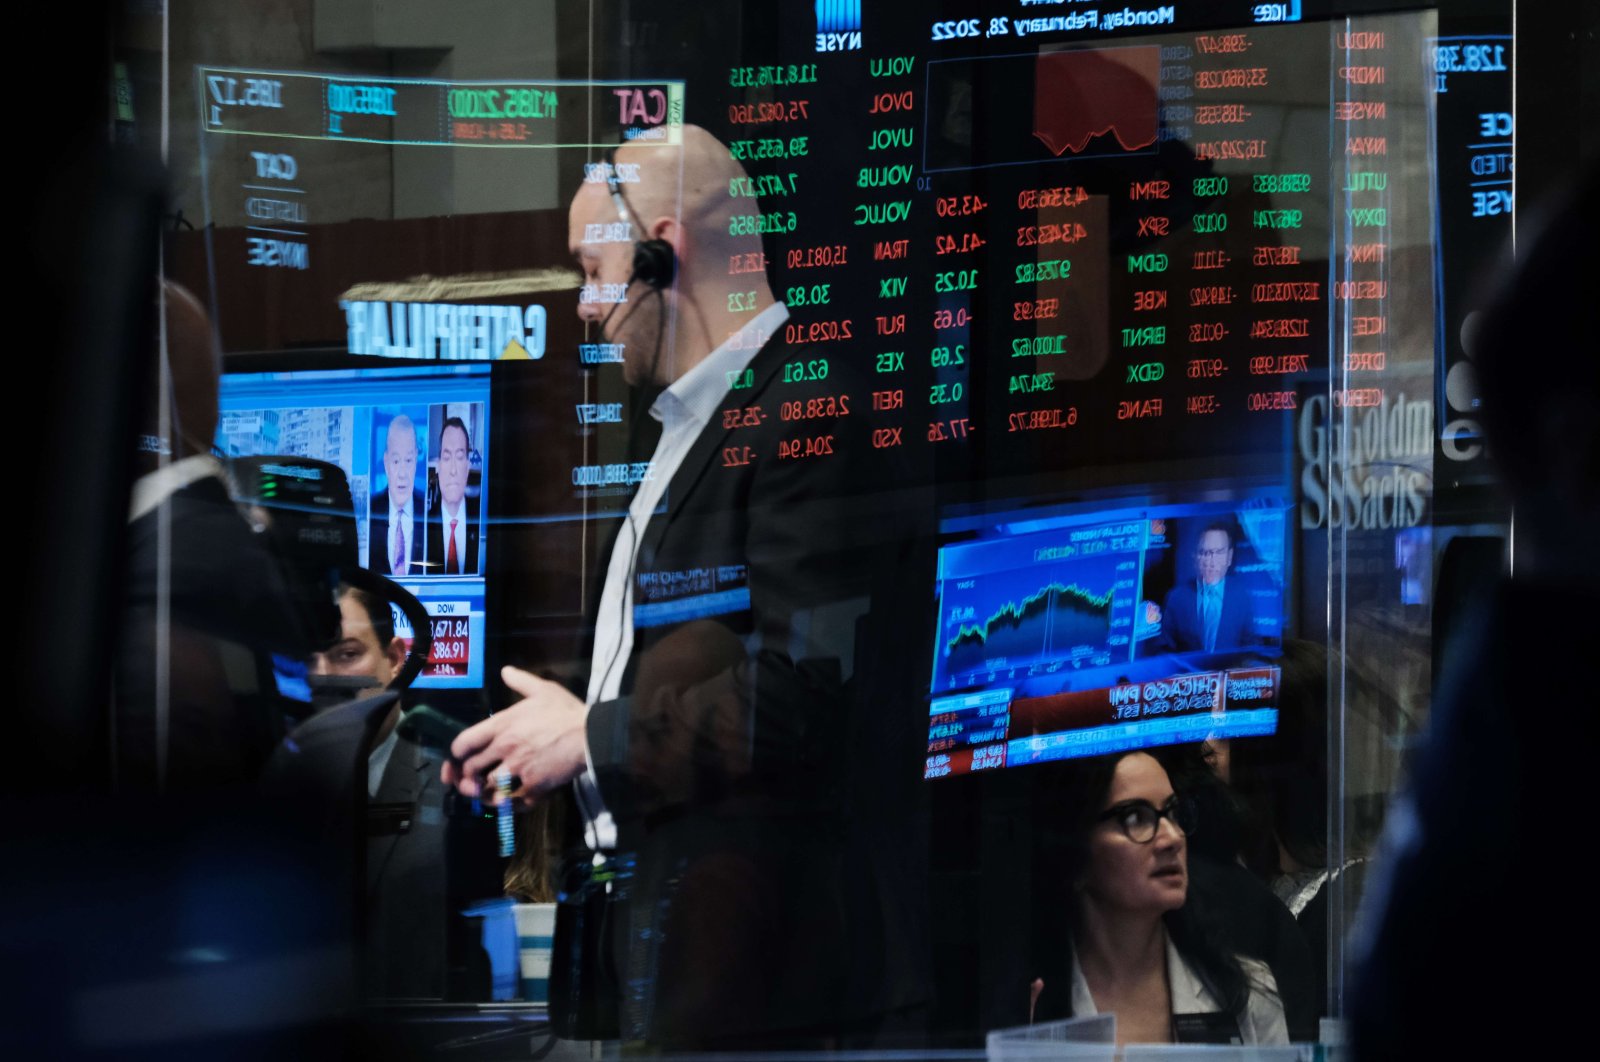 Traders work on the floor of the New York Stock Exchange (NYSE) in New York City, U.S., Feb. 28, 2022. (AFP Photo)